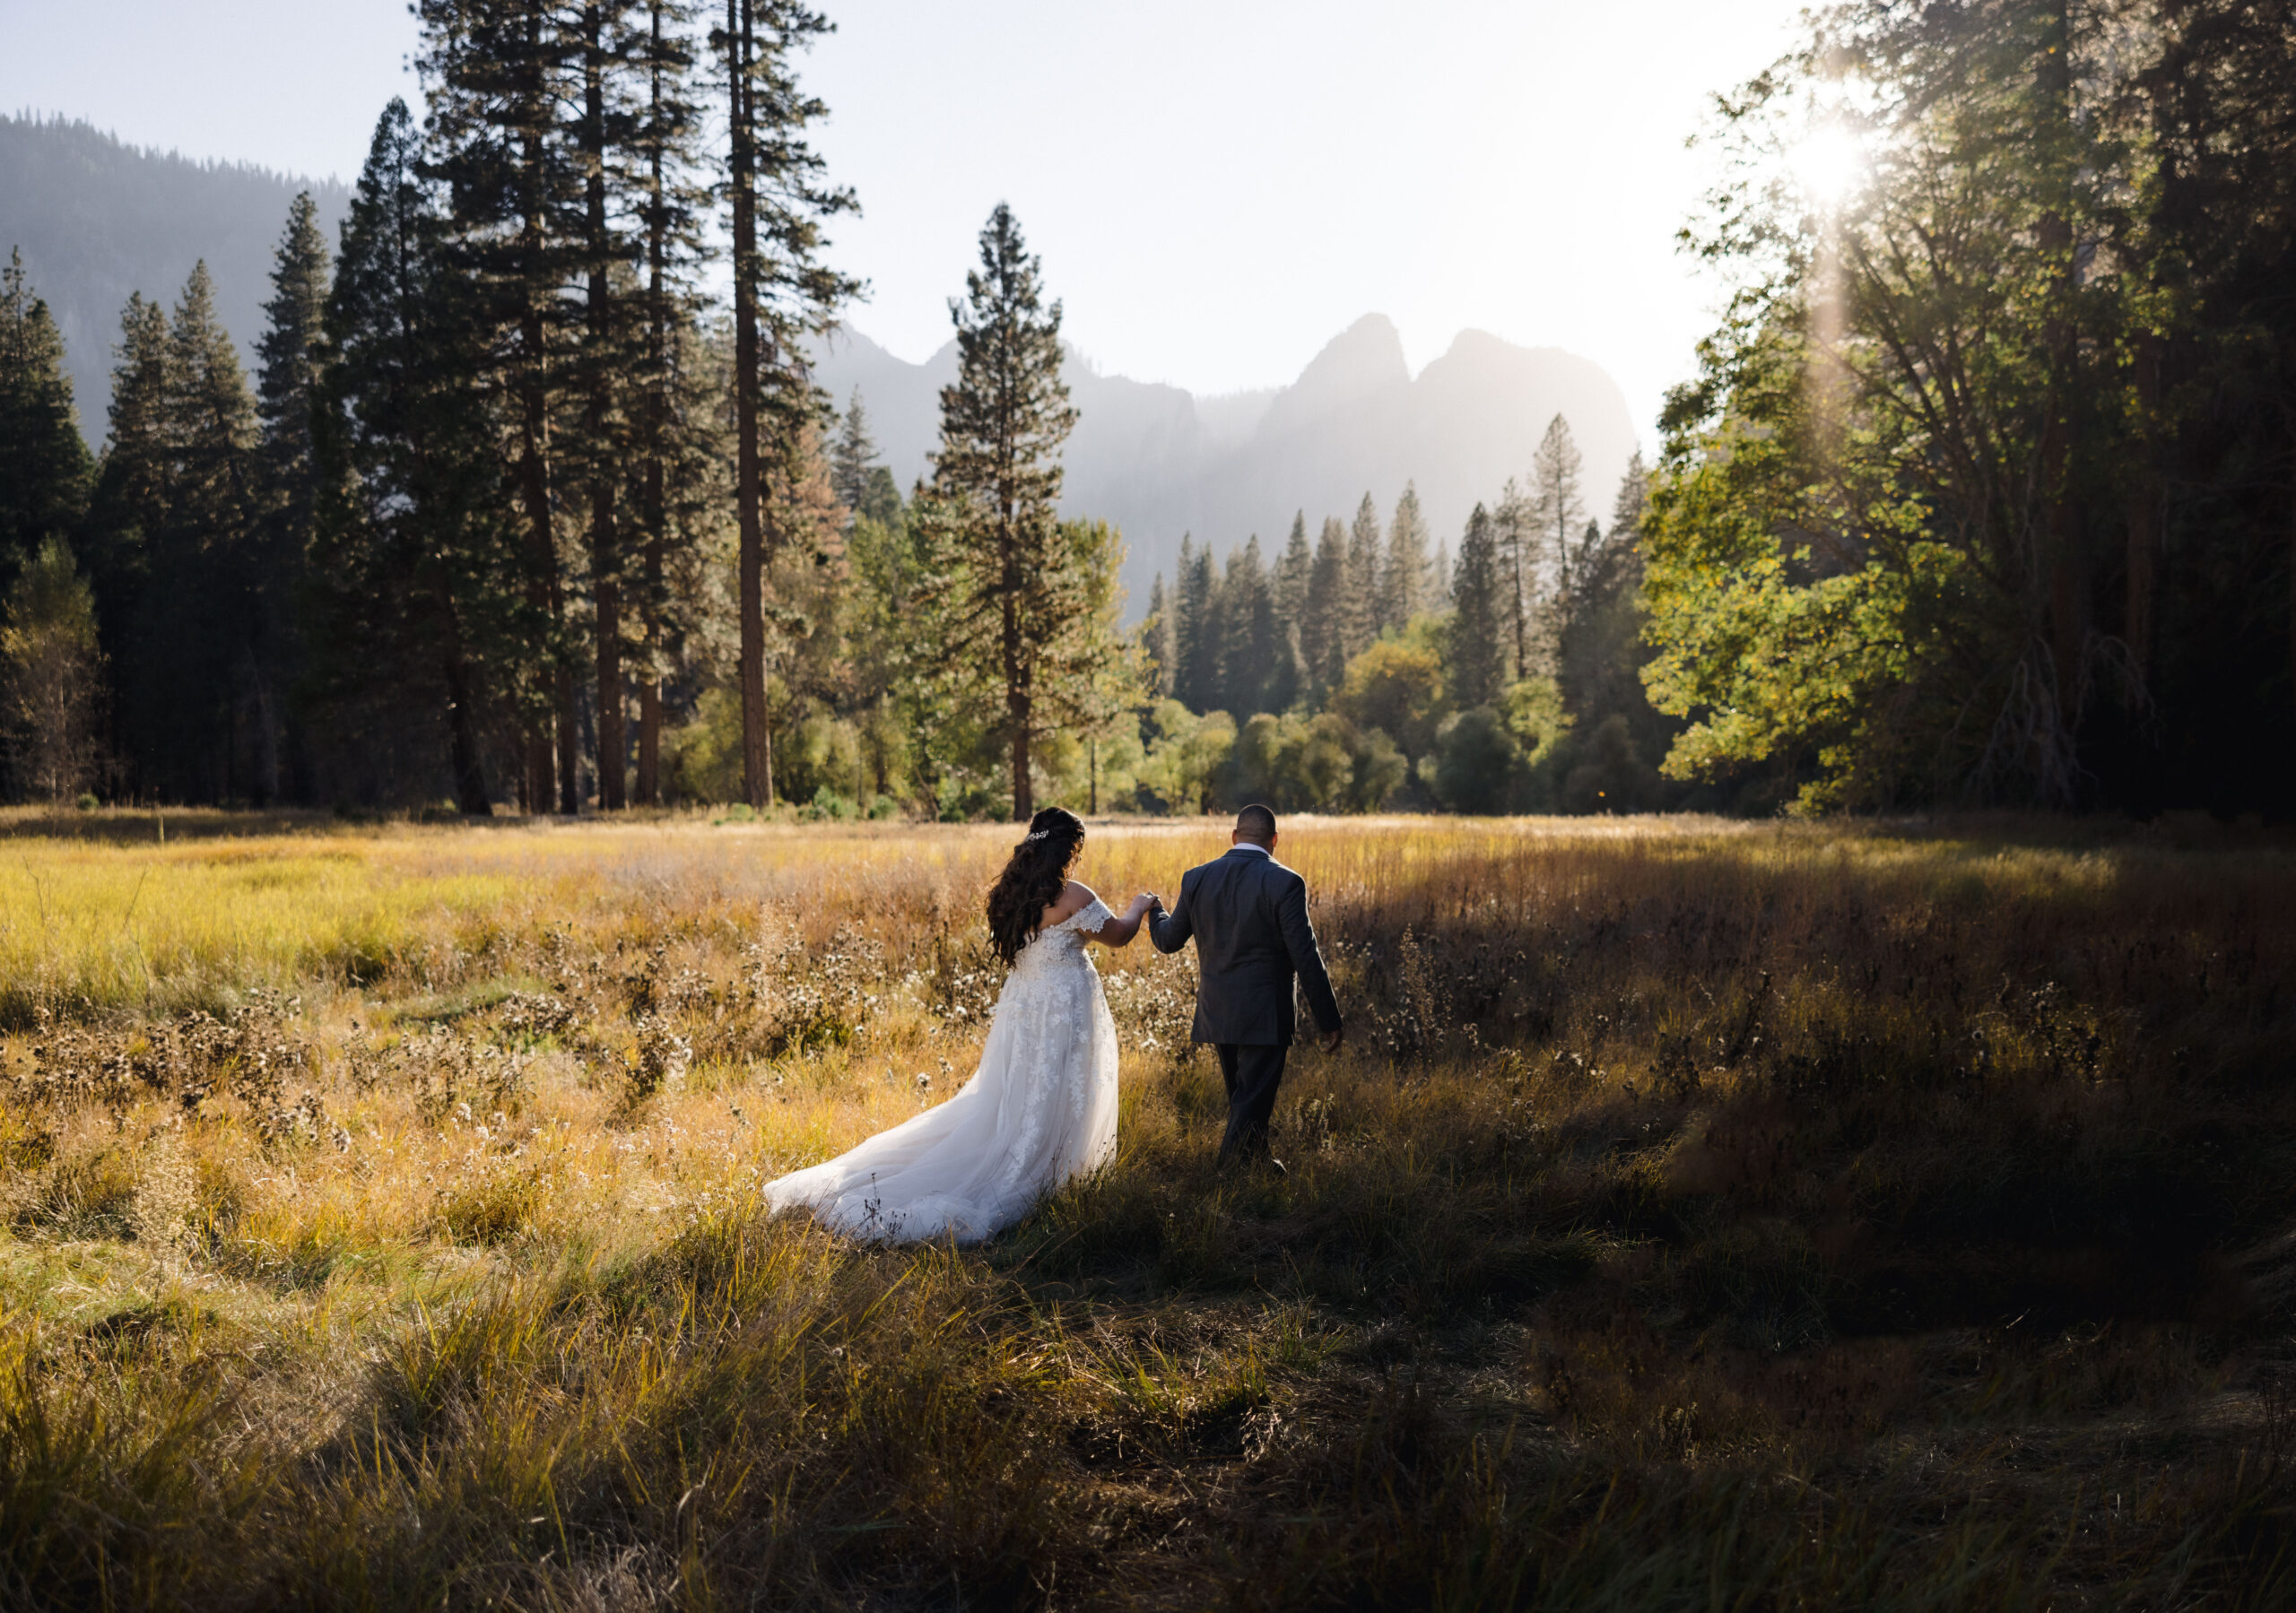 A great place to elope with gamily is Yosemite National Park.